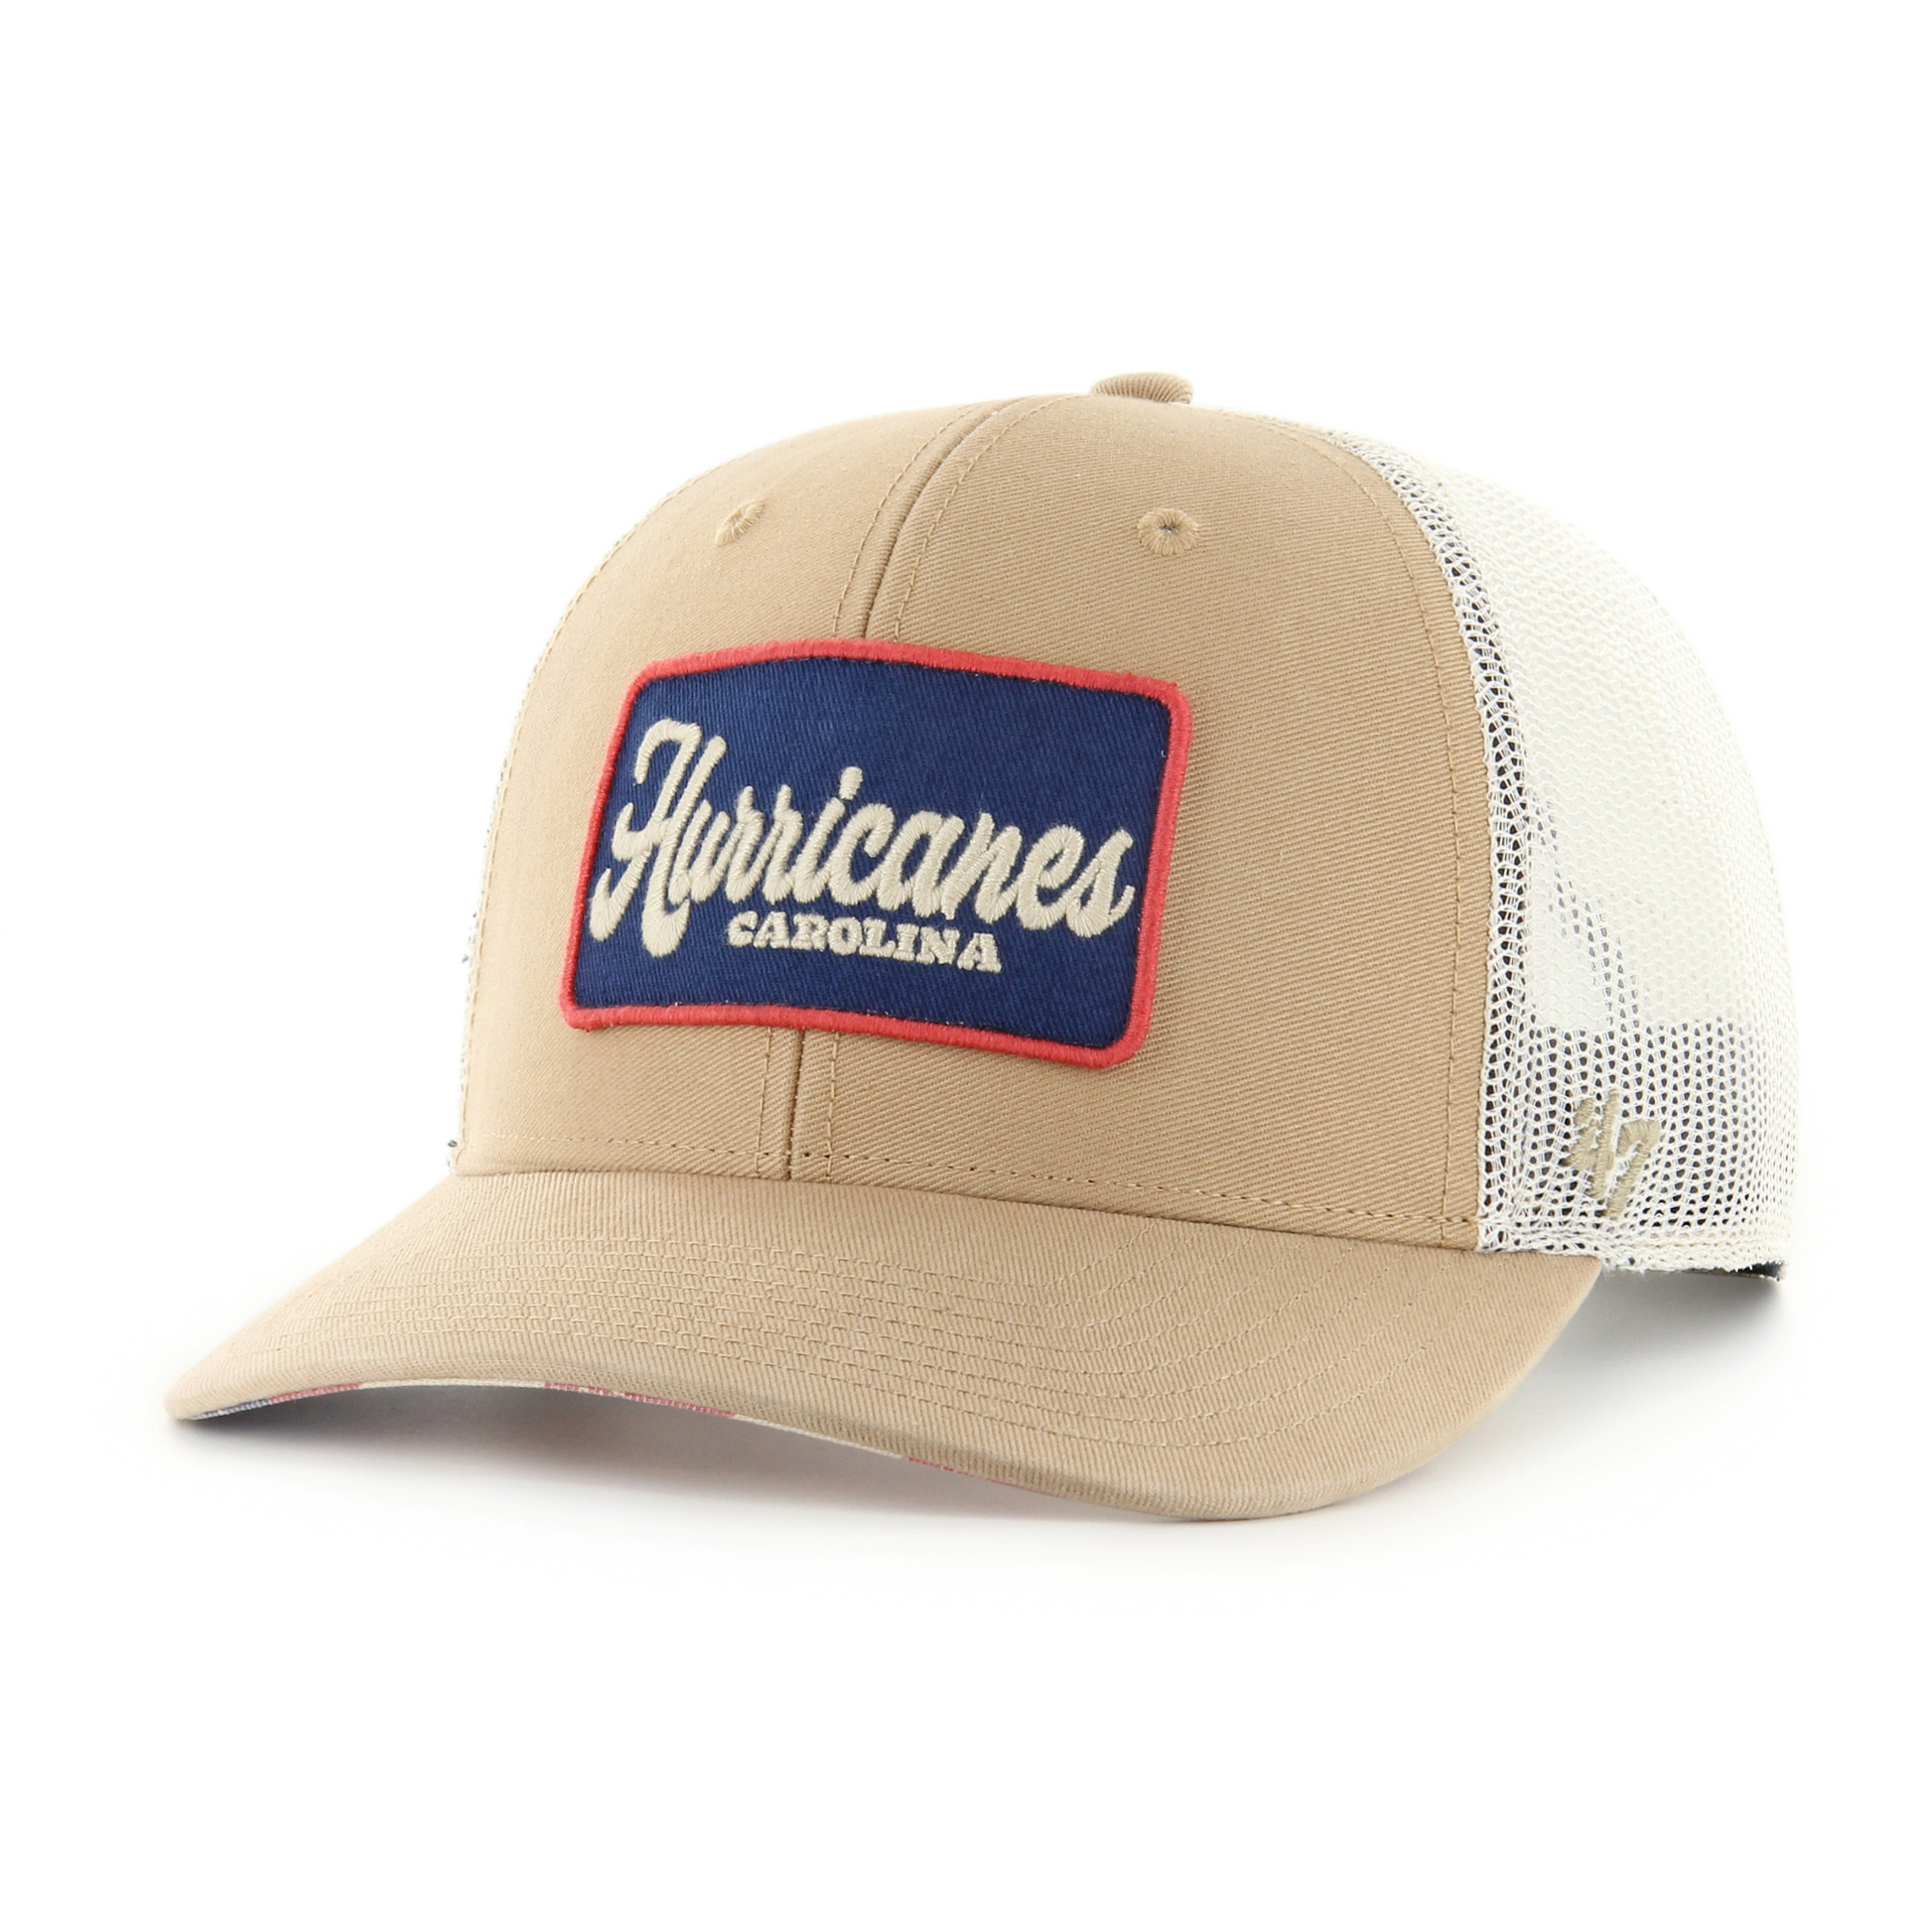 Front: Baseball cap trucker tan with white mesh Hurricanes Carolina patch with blue backing and red trim